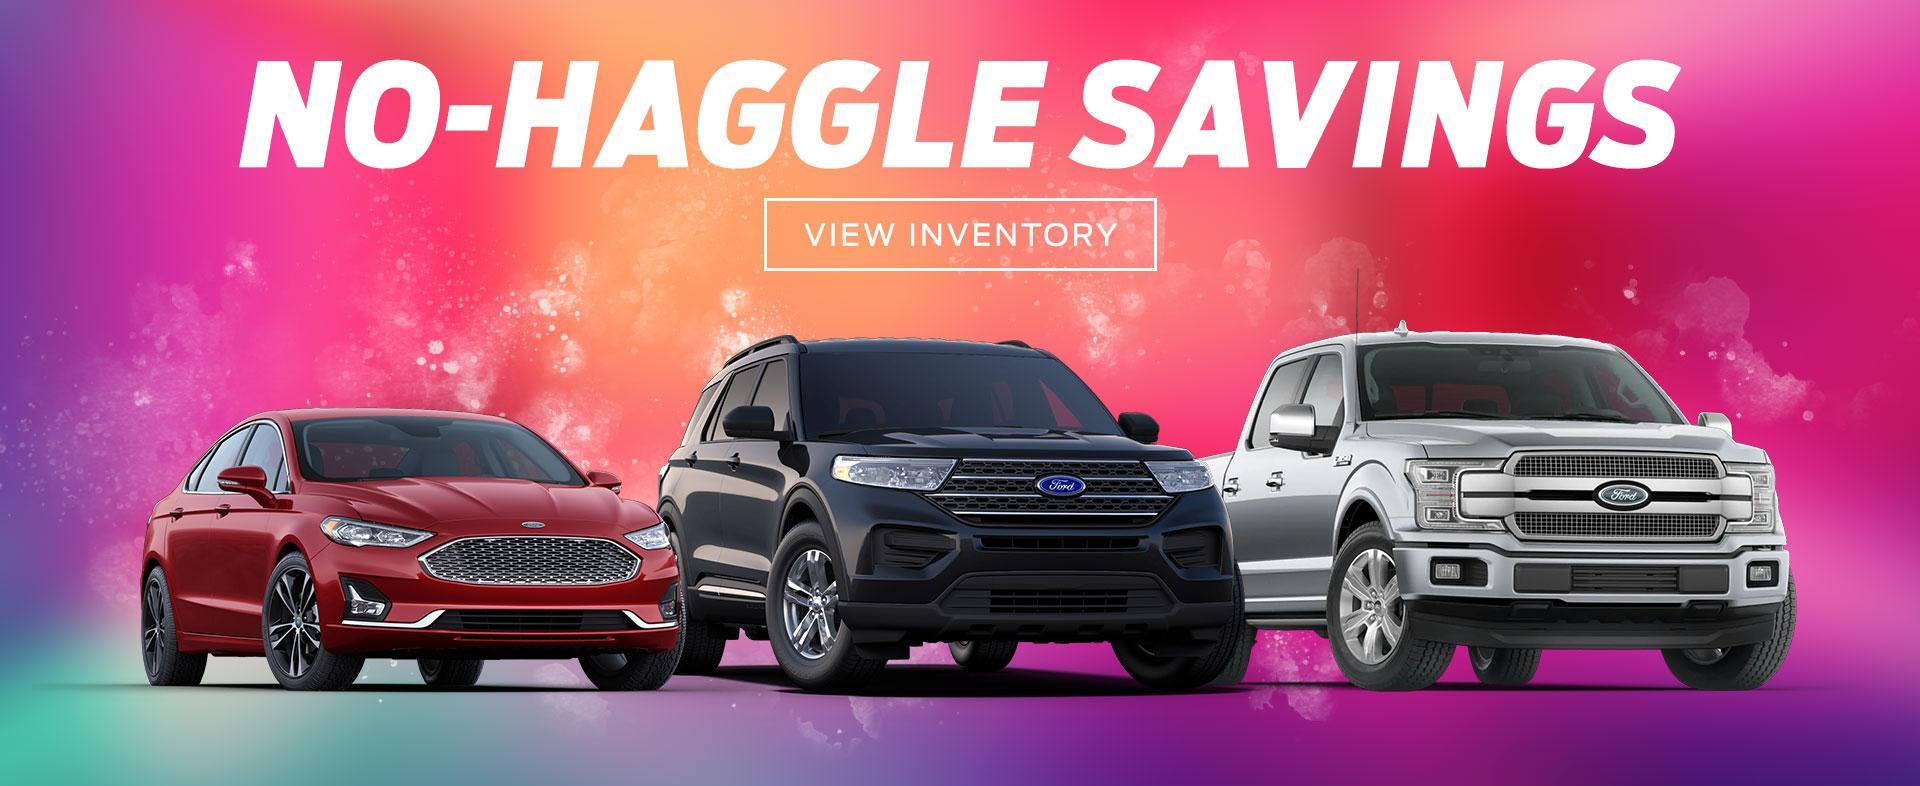 No Haggle Savings on Used Inventory at Castle Ford Sales